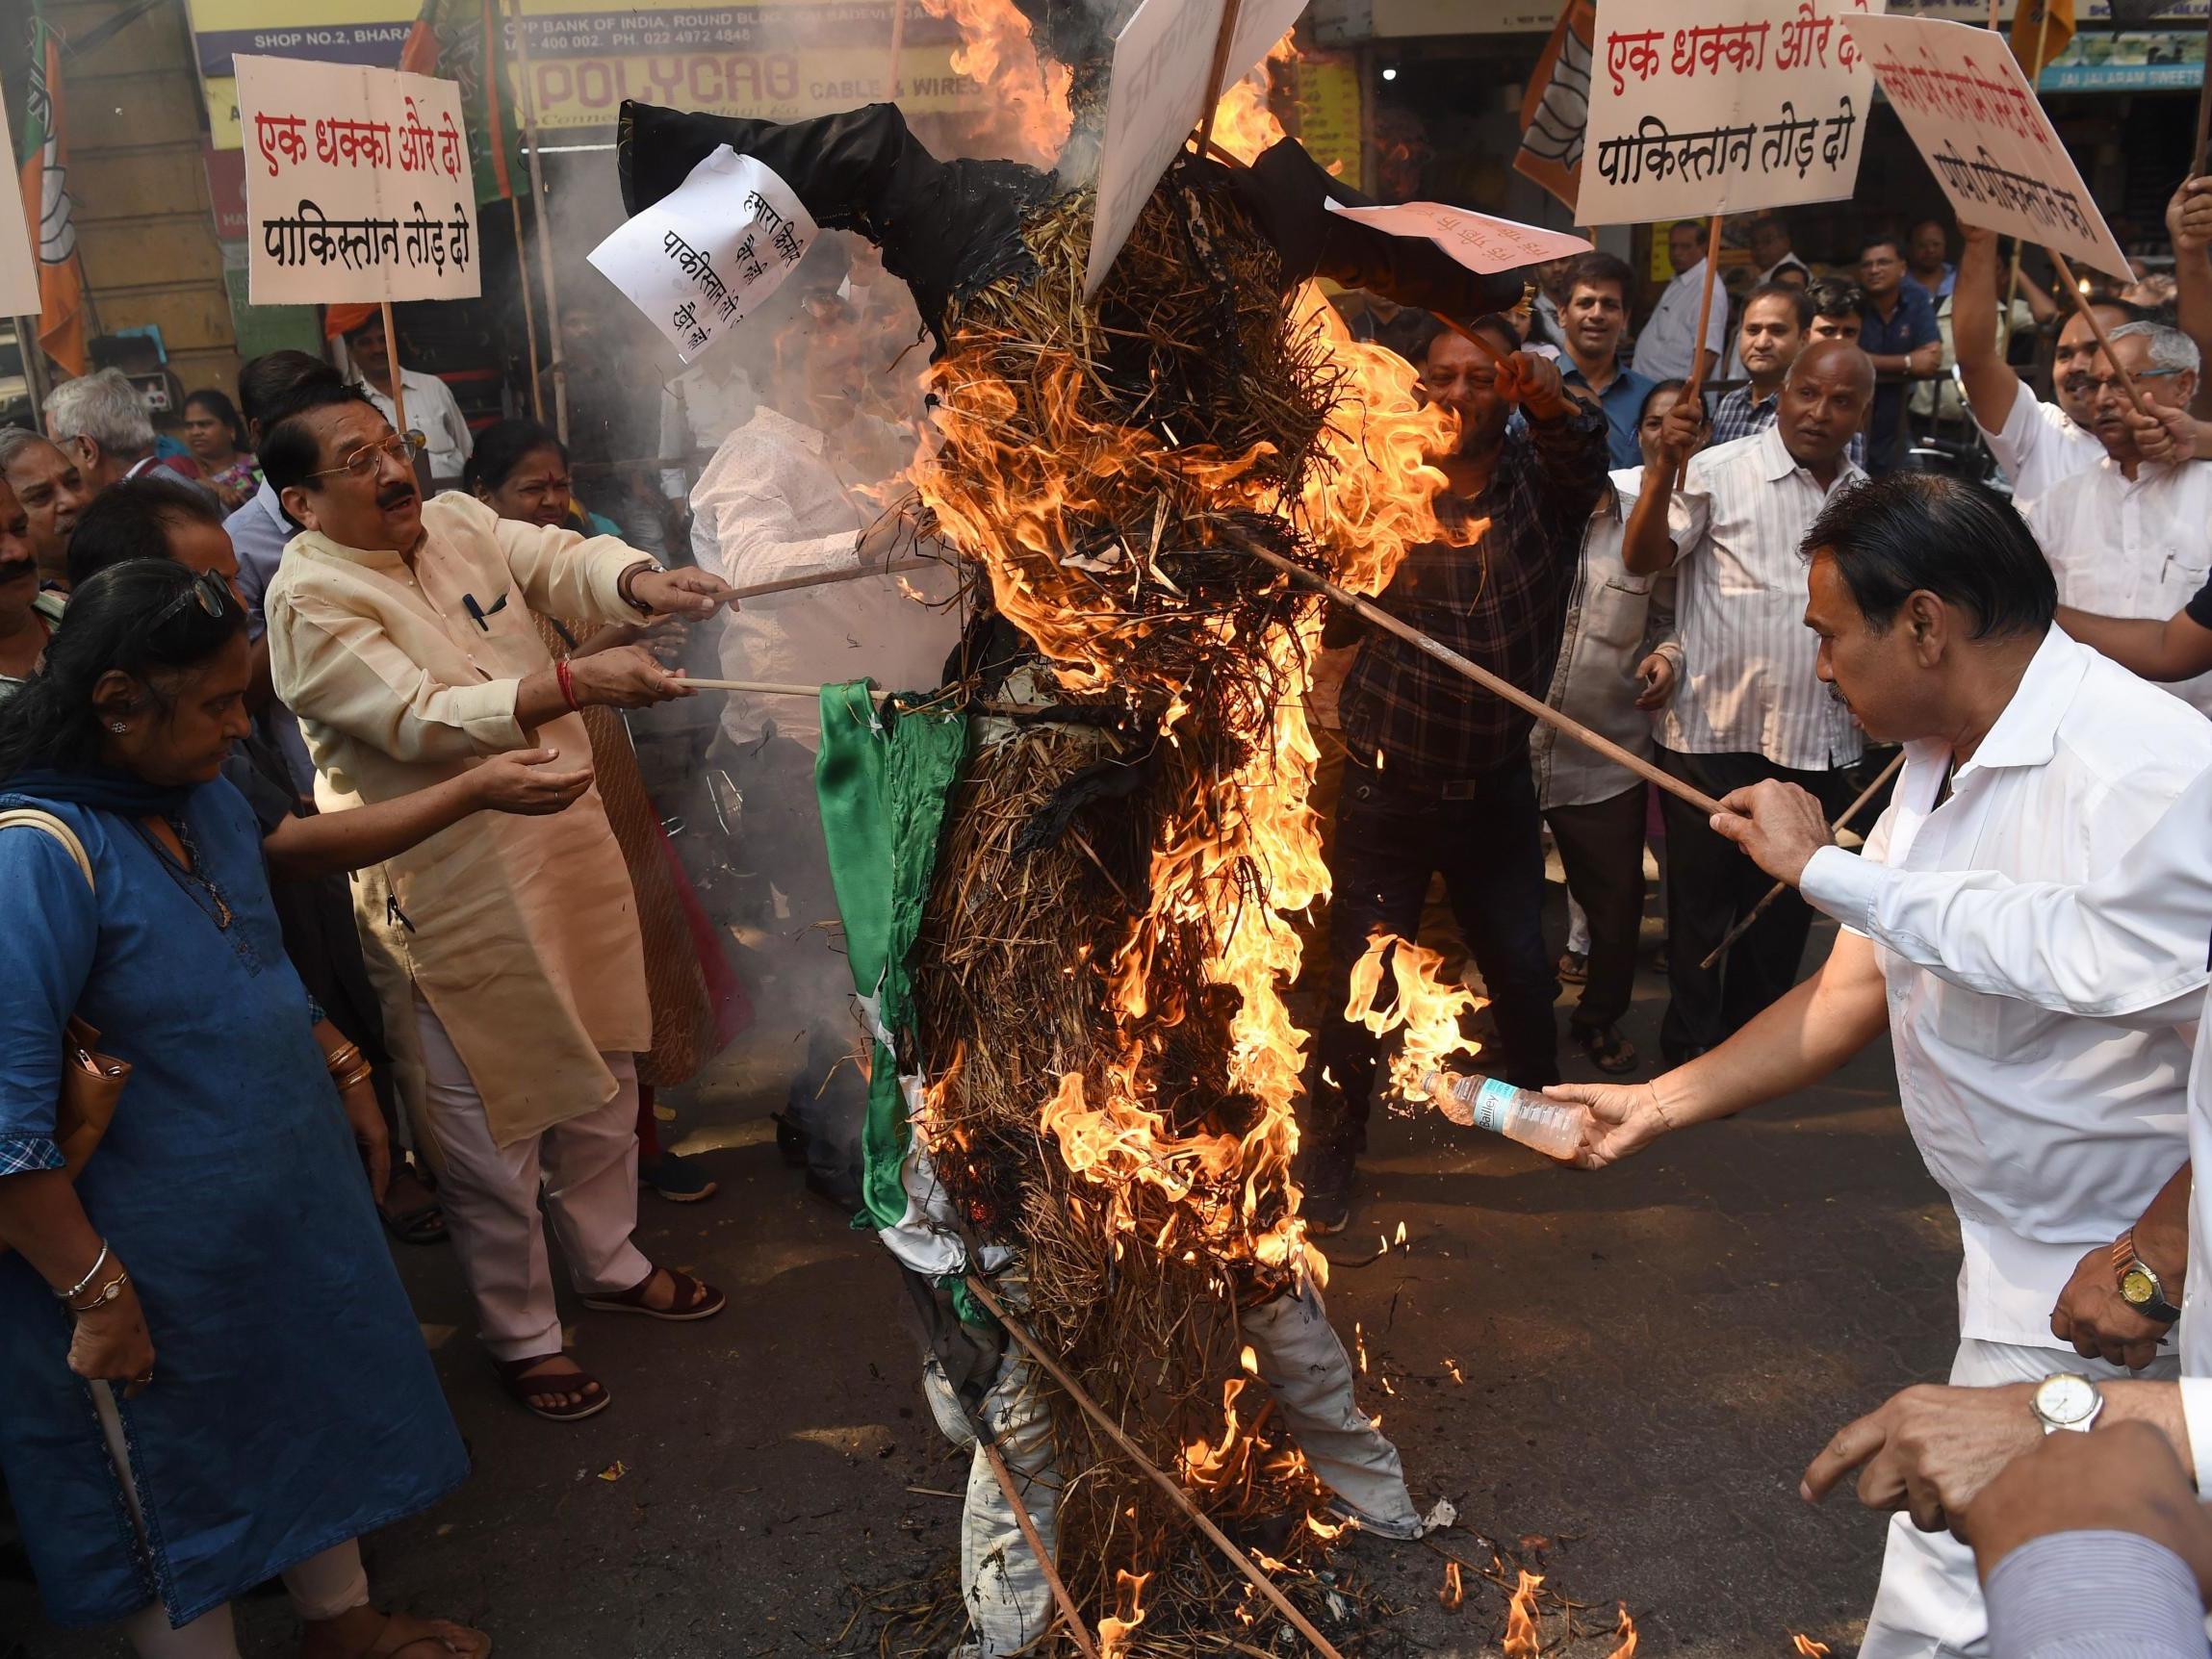 BJP activists burn an effigy at an anti-Pakistan protest following the attack